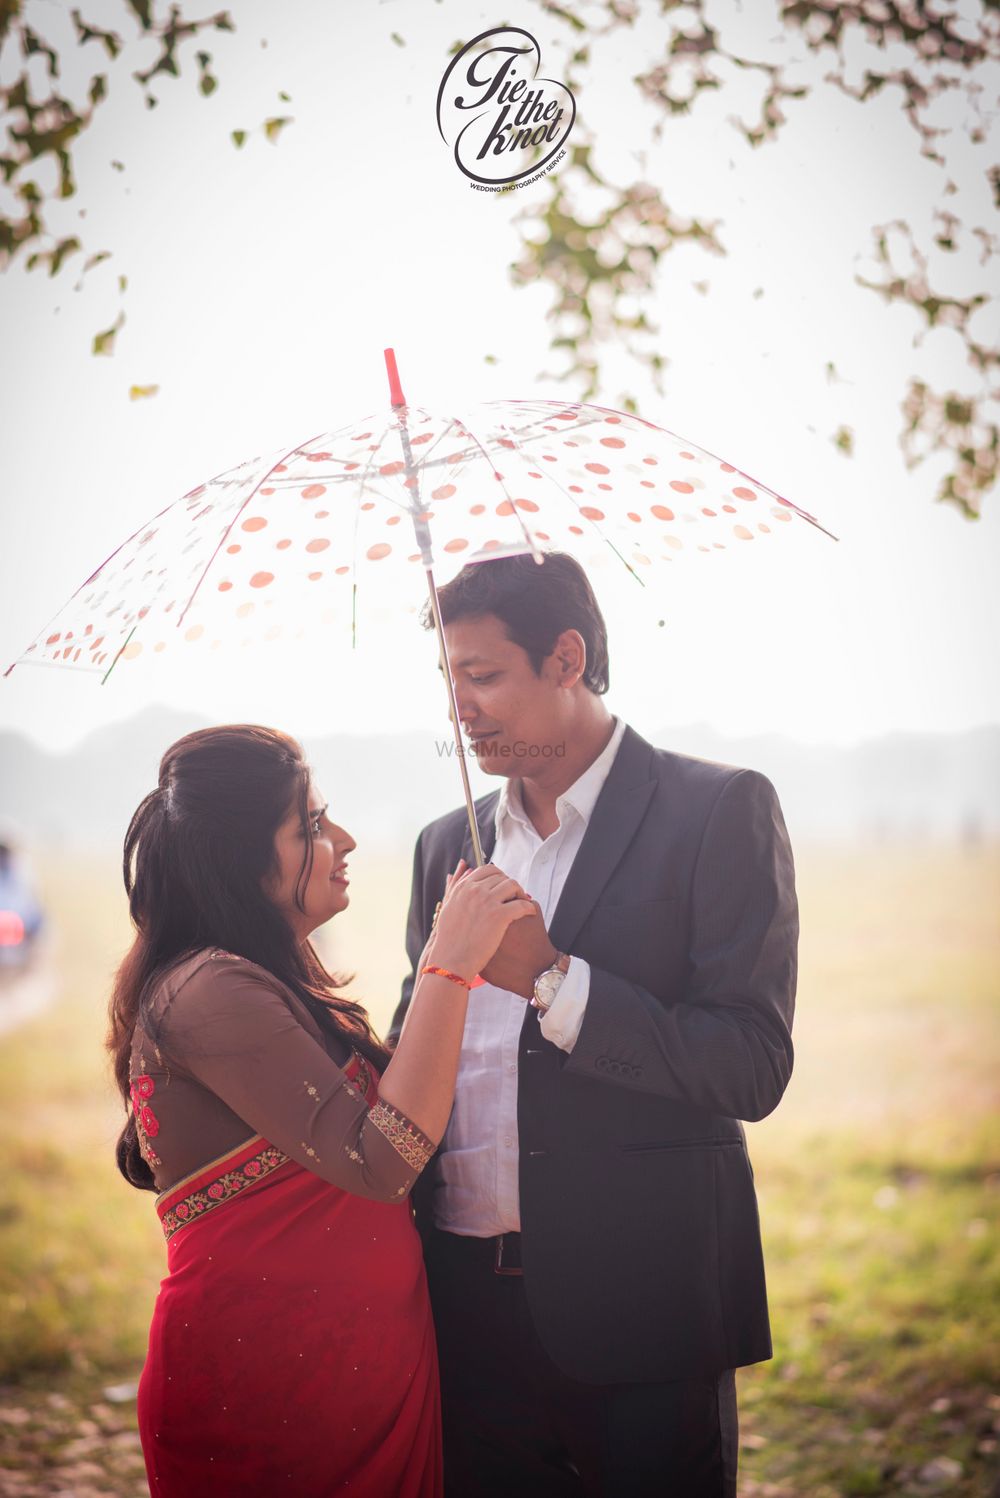 Photo From Finest Pre-wedding Shoots - By Tie the Knot